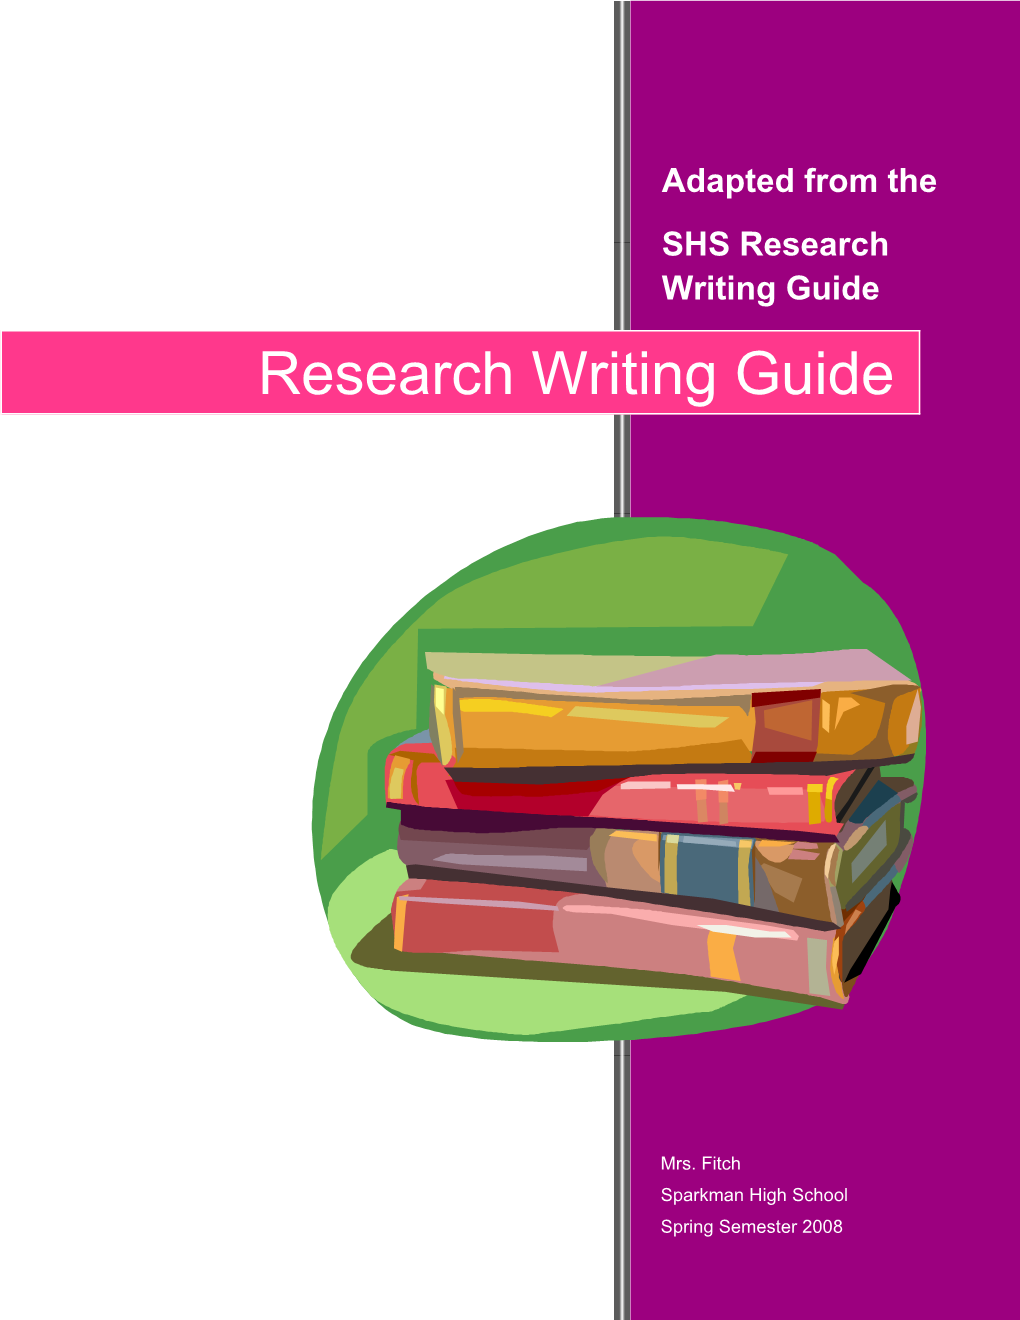 Research Writing Guide